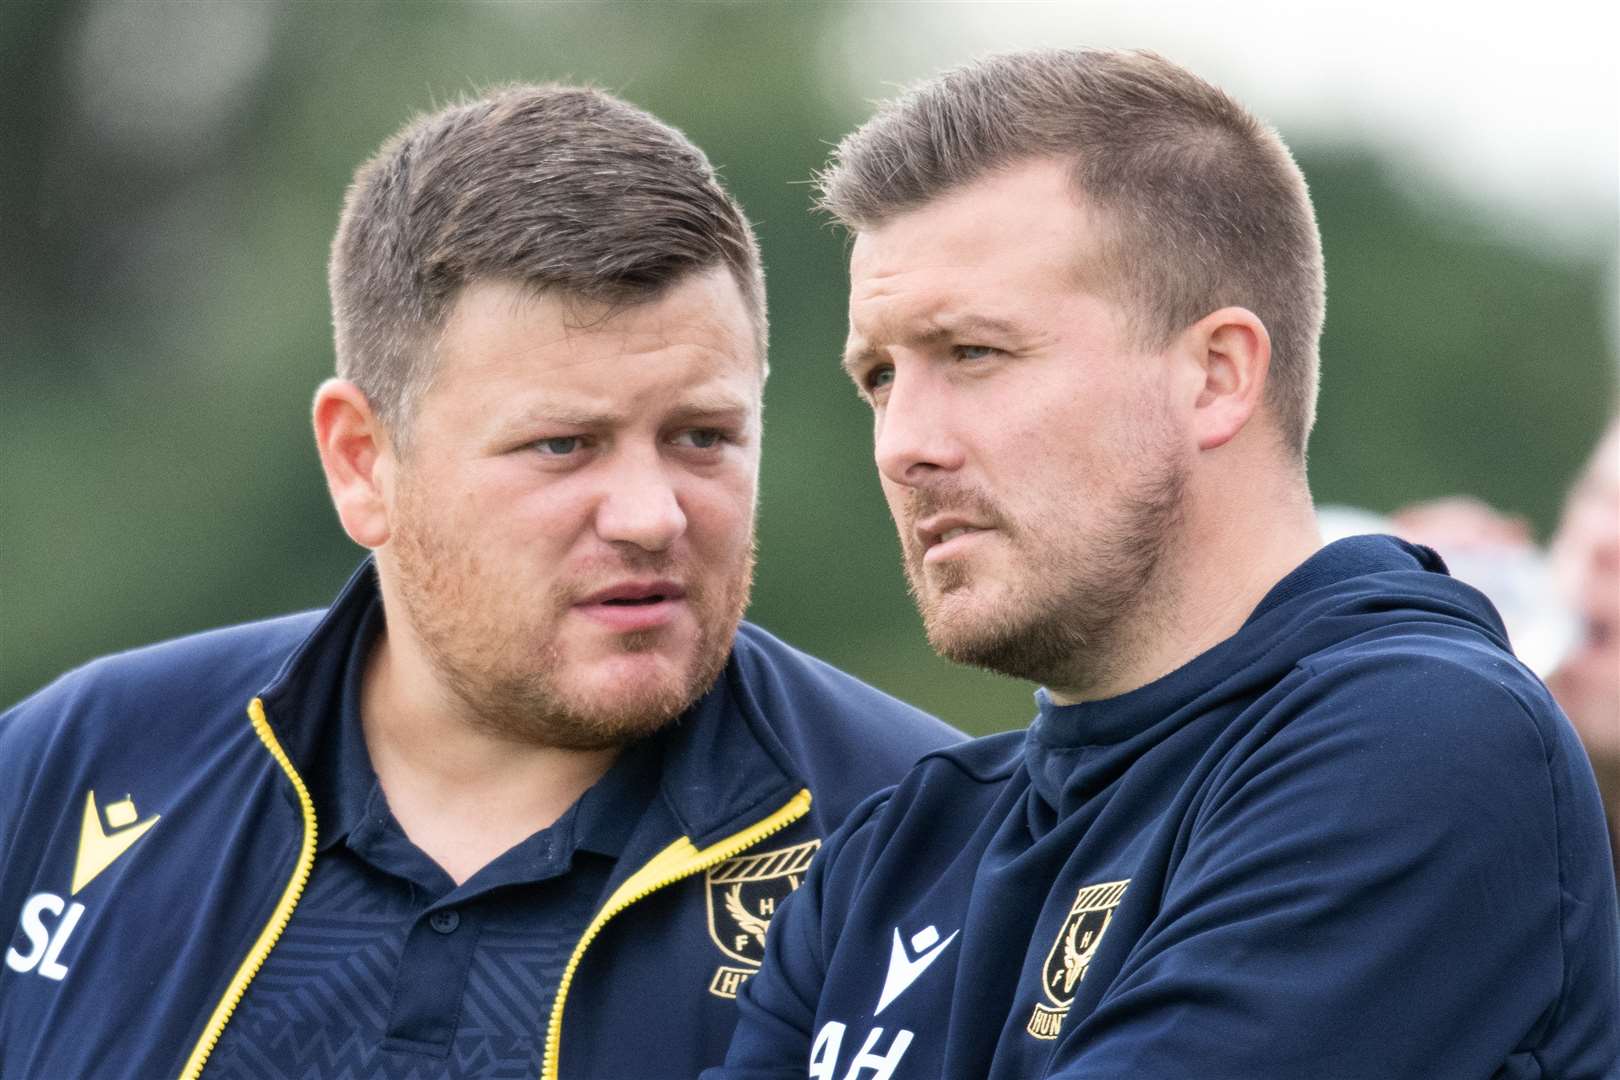 Huntly manager Allan Hale (right) and assistant manager Stefan Laird (left)...Buckie Thistle FC (3) vs Huntly FC (0) - Highland Football League 23/24 - Victoria Park, Buckie 02/09/2023...Picture: Daniel Forsyth..